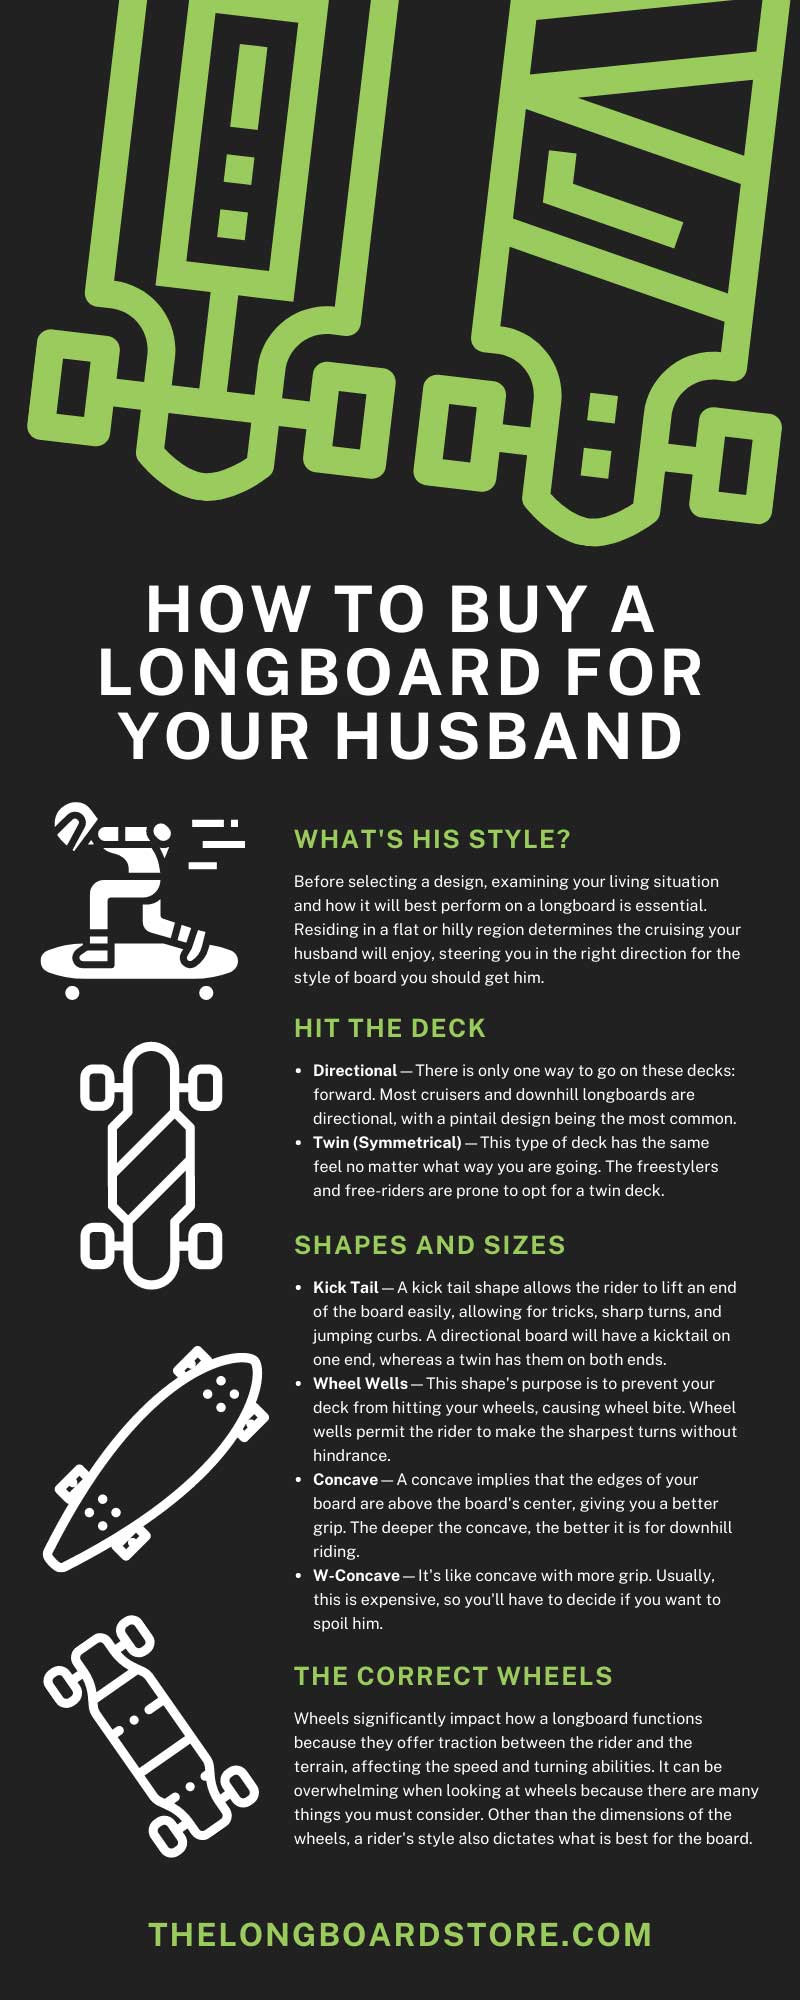 How To Buy a Longboard for Your Husband